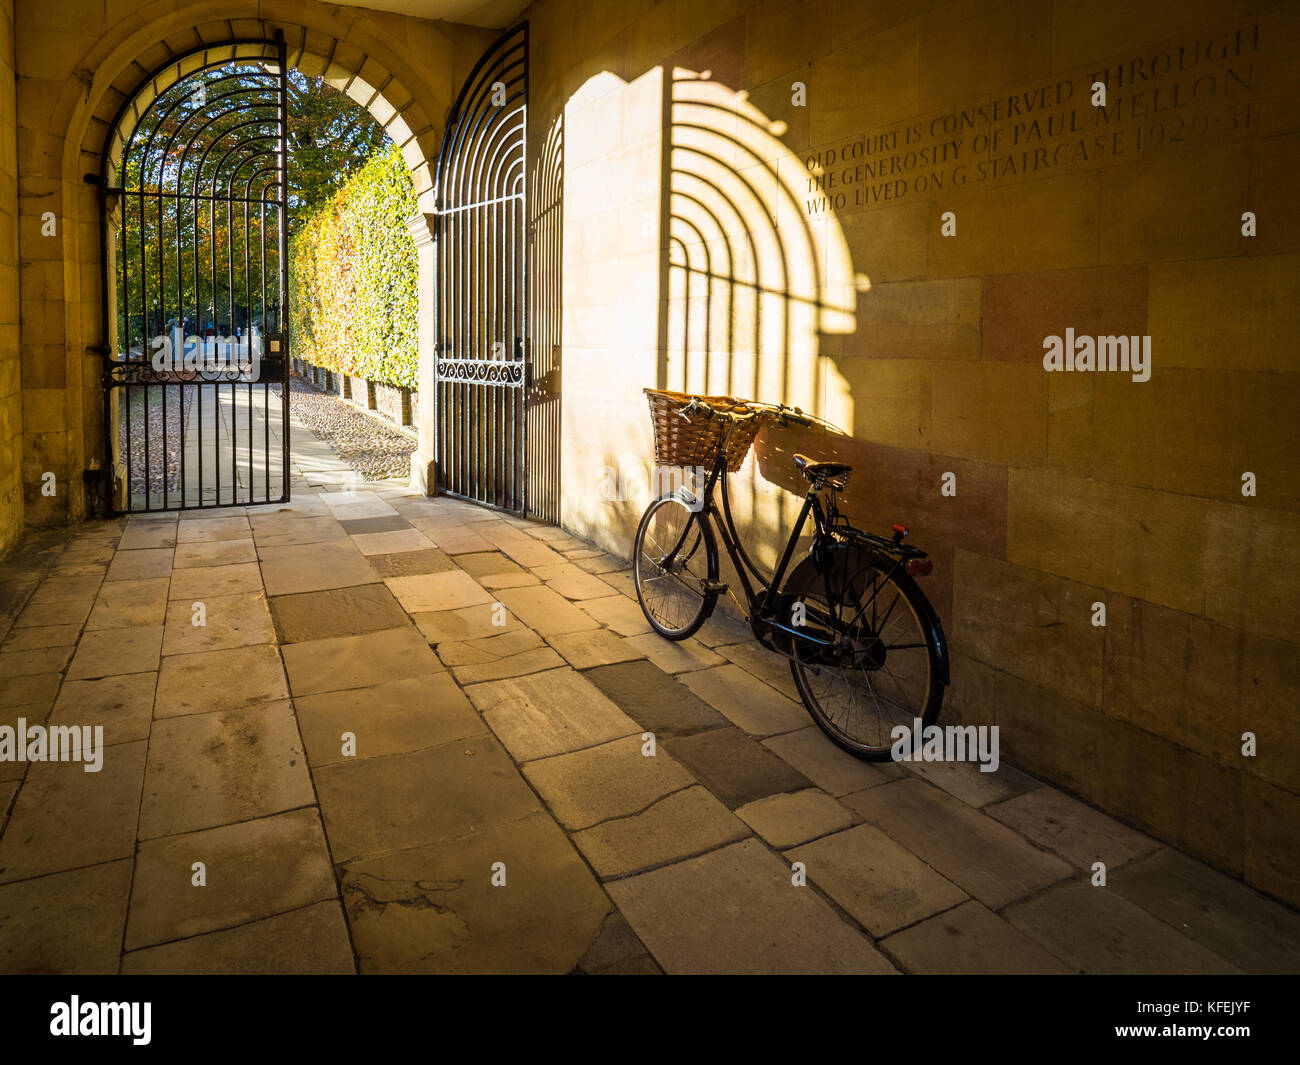 Cambridge Tourism - Student Bike parked in a picturesque gateway in Clare College, part of Cambridge University in central Cambridge UK Stock Photo